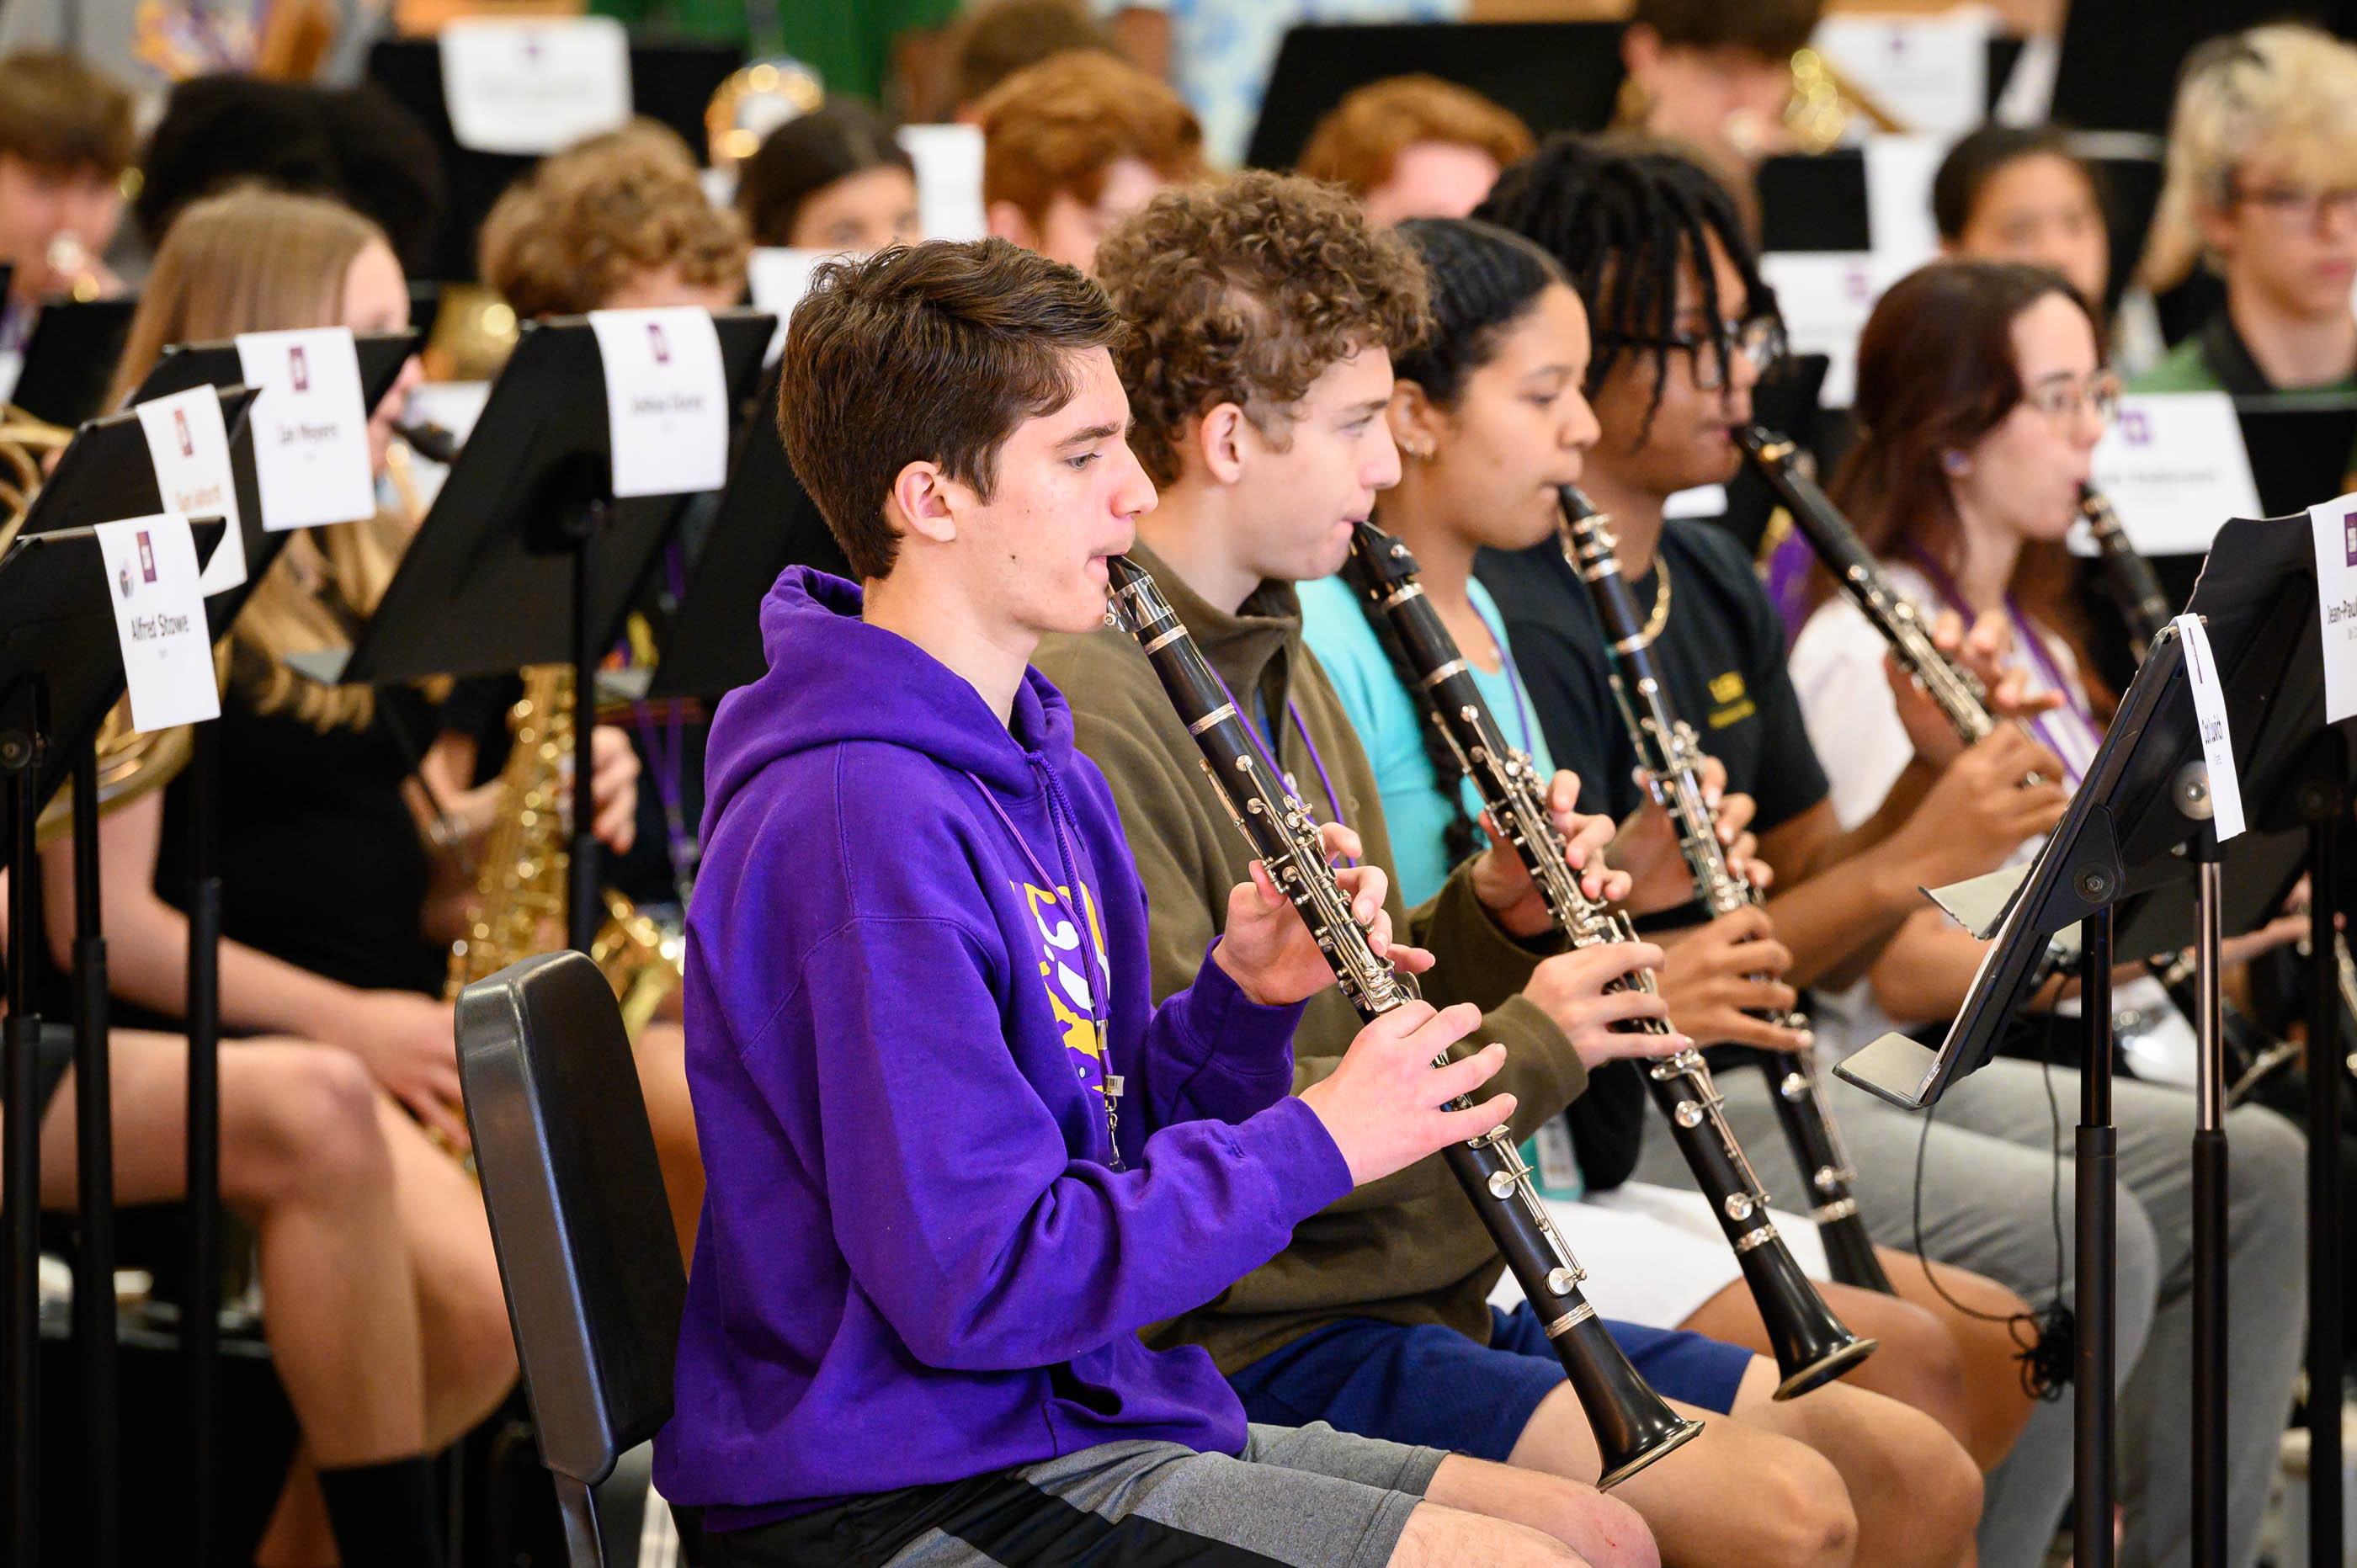 clarinet players performing